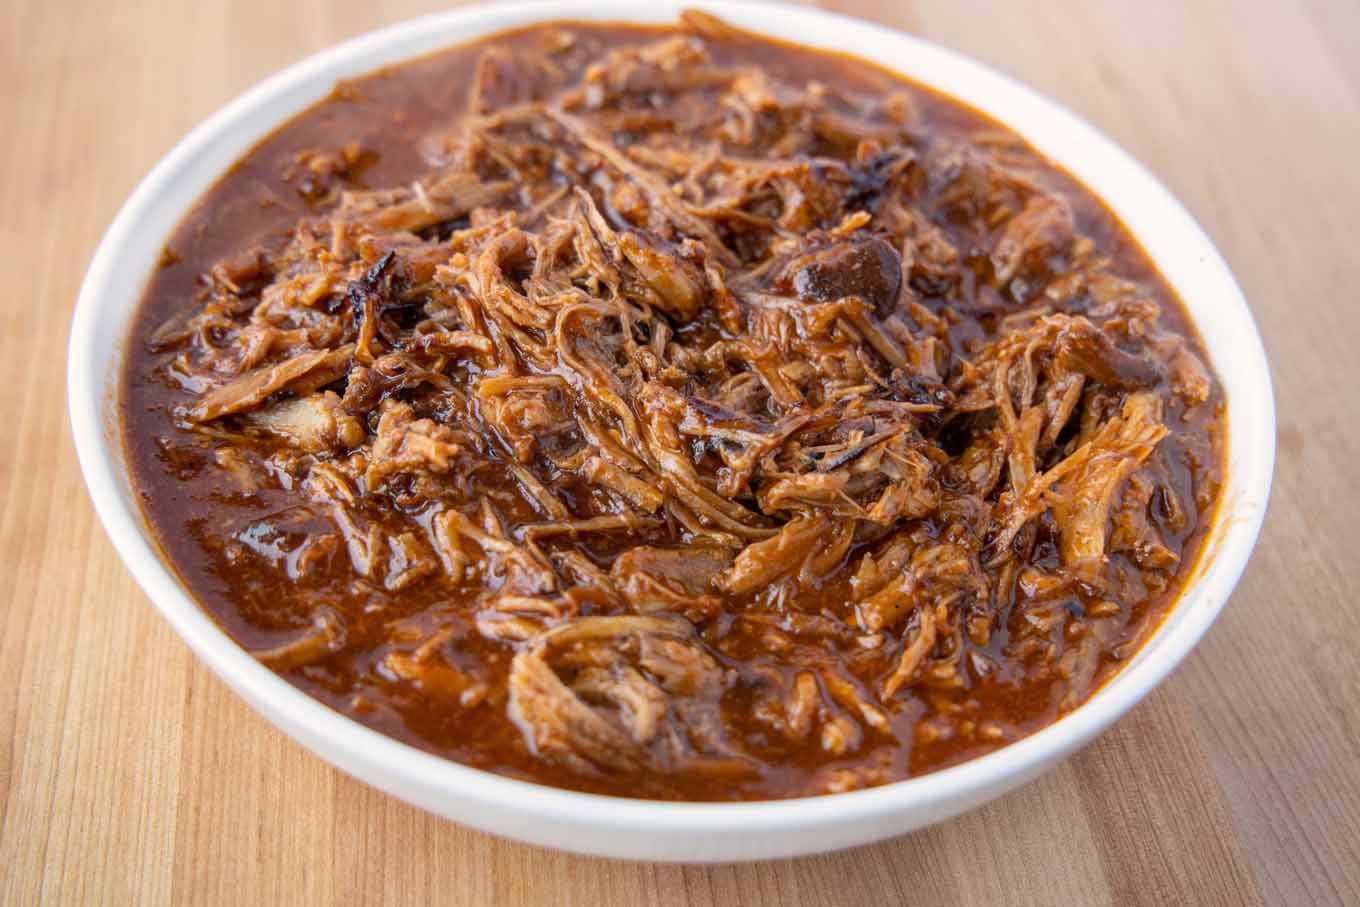 Easy Oven Cooked Pulled Pork Recipe